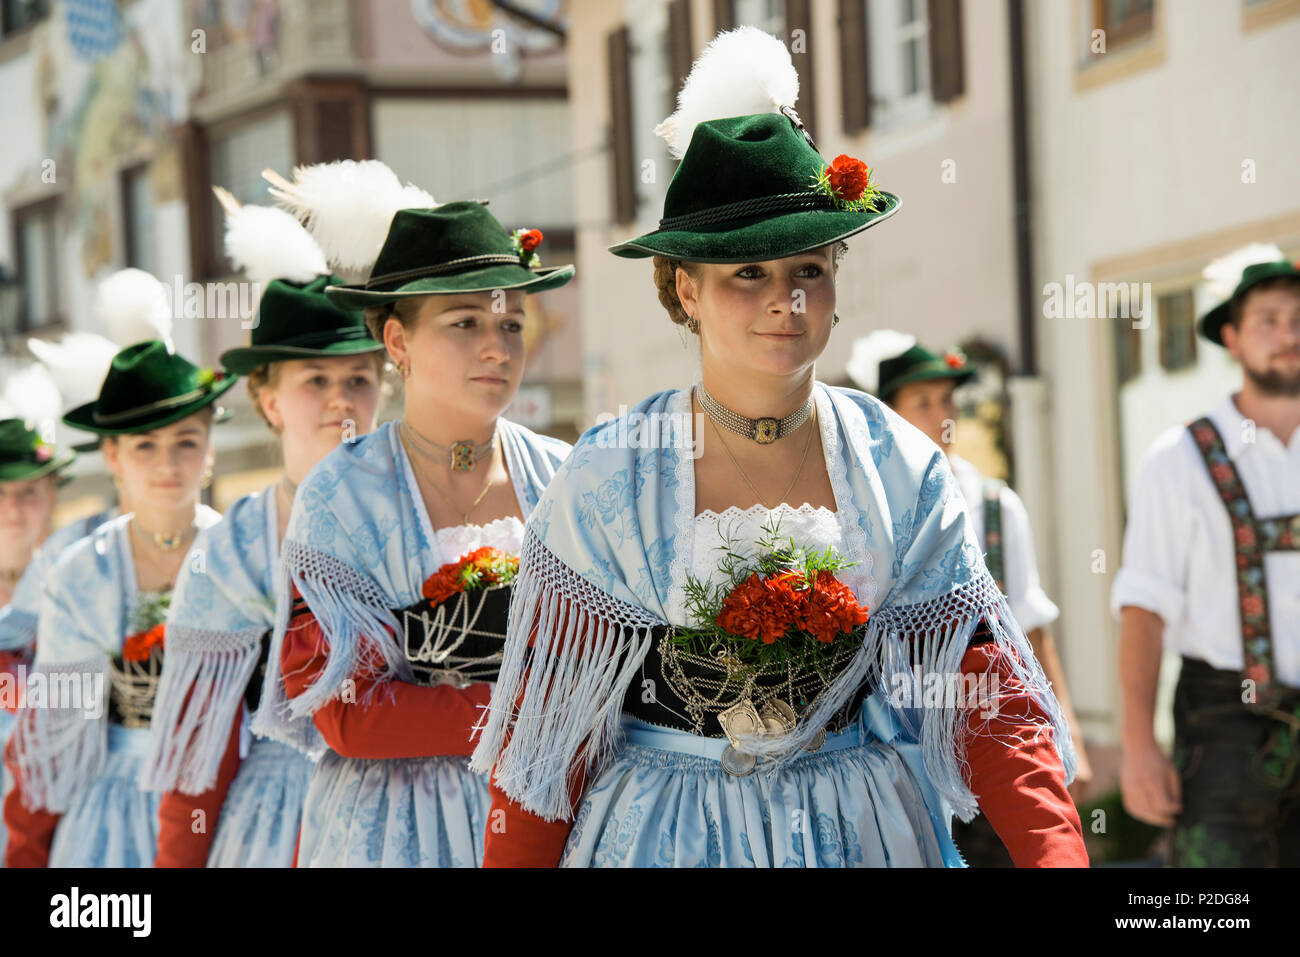 Women wearing traditional clothes, traditional procession, Garmisch-Partenkirchen, Bavaria, Germany Stock Photo